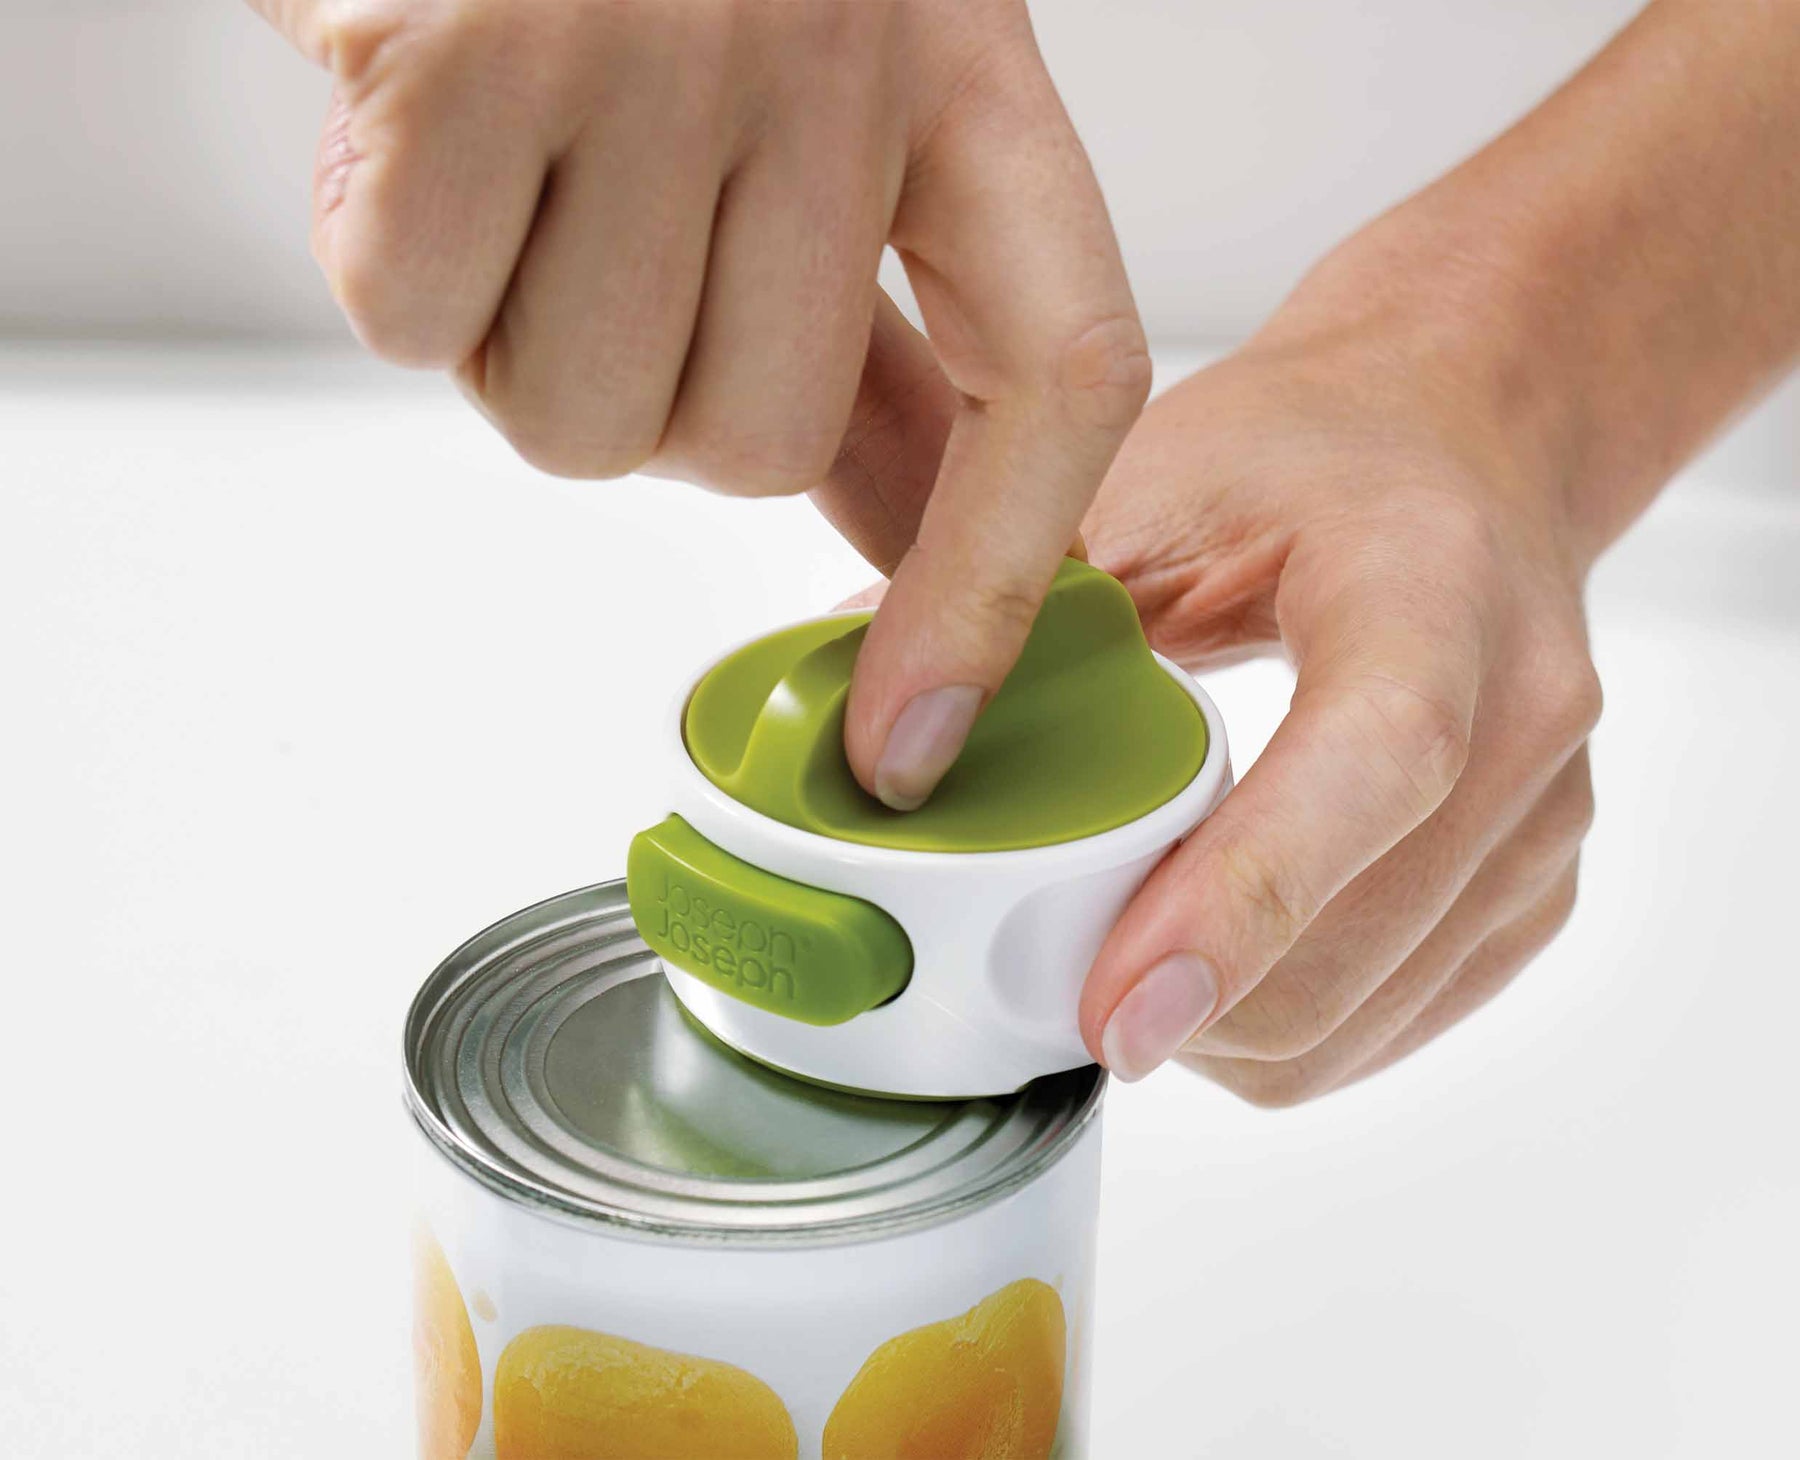 Try Before You Buy: 'Tornado' can opener